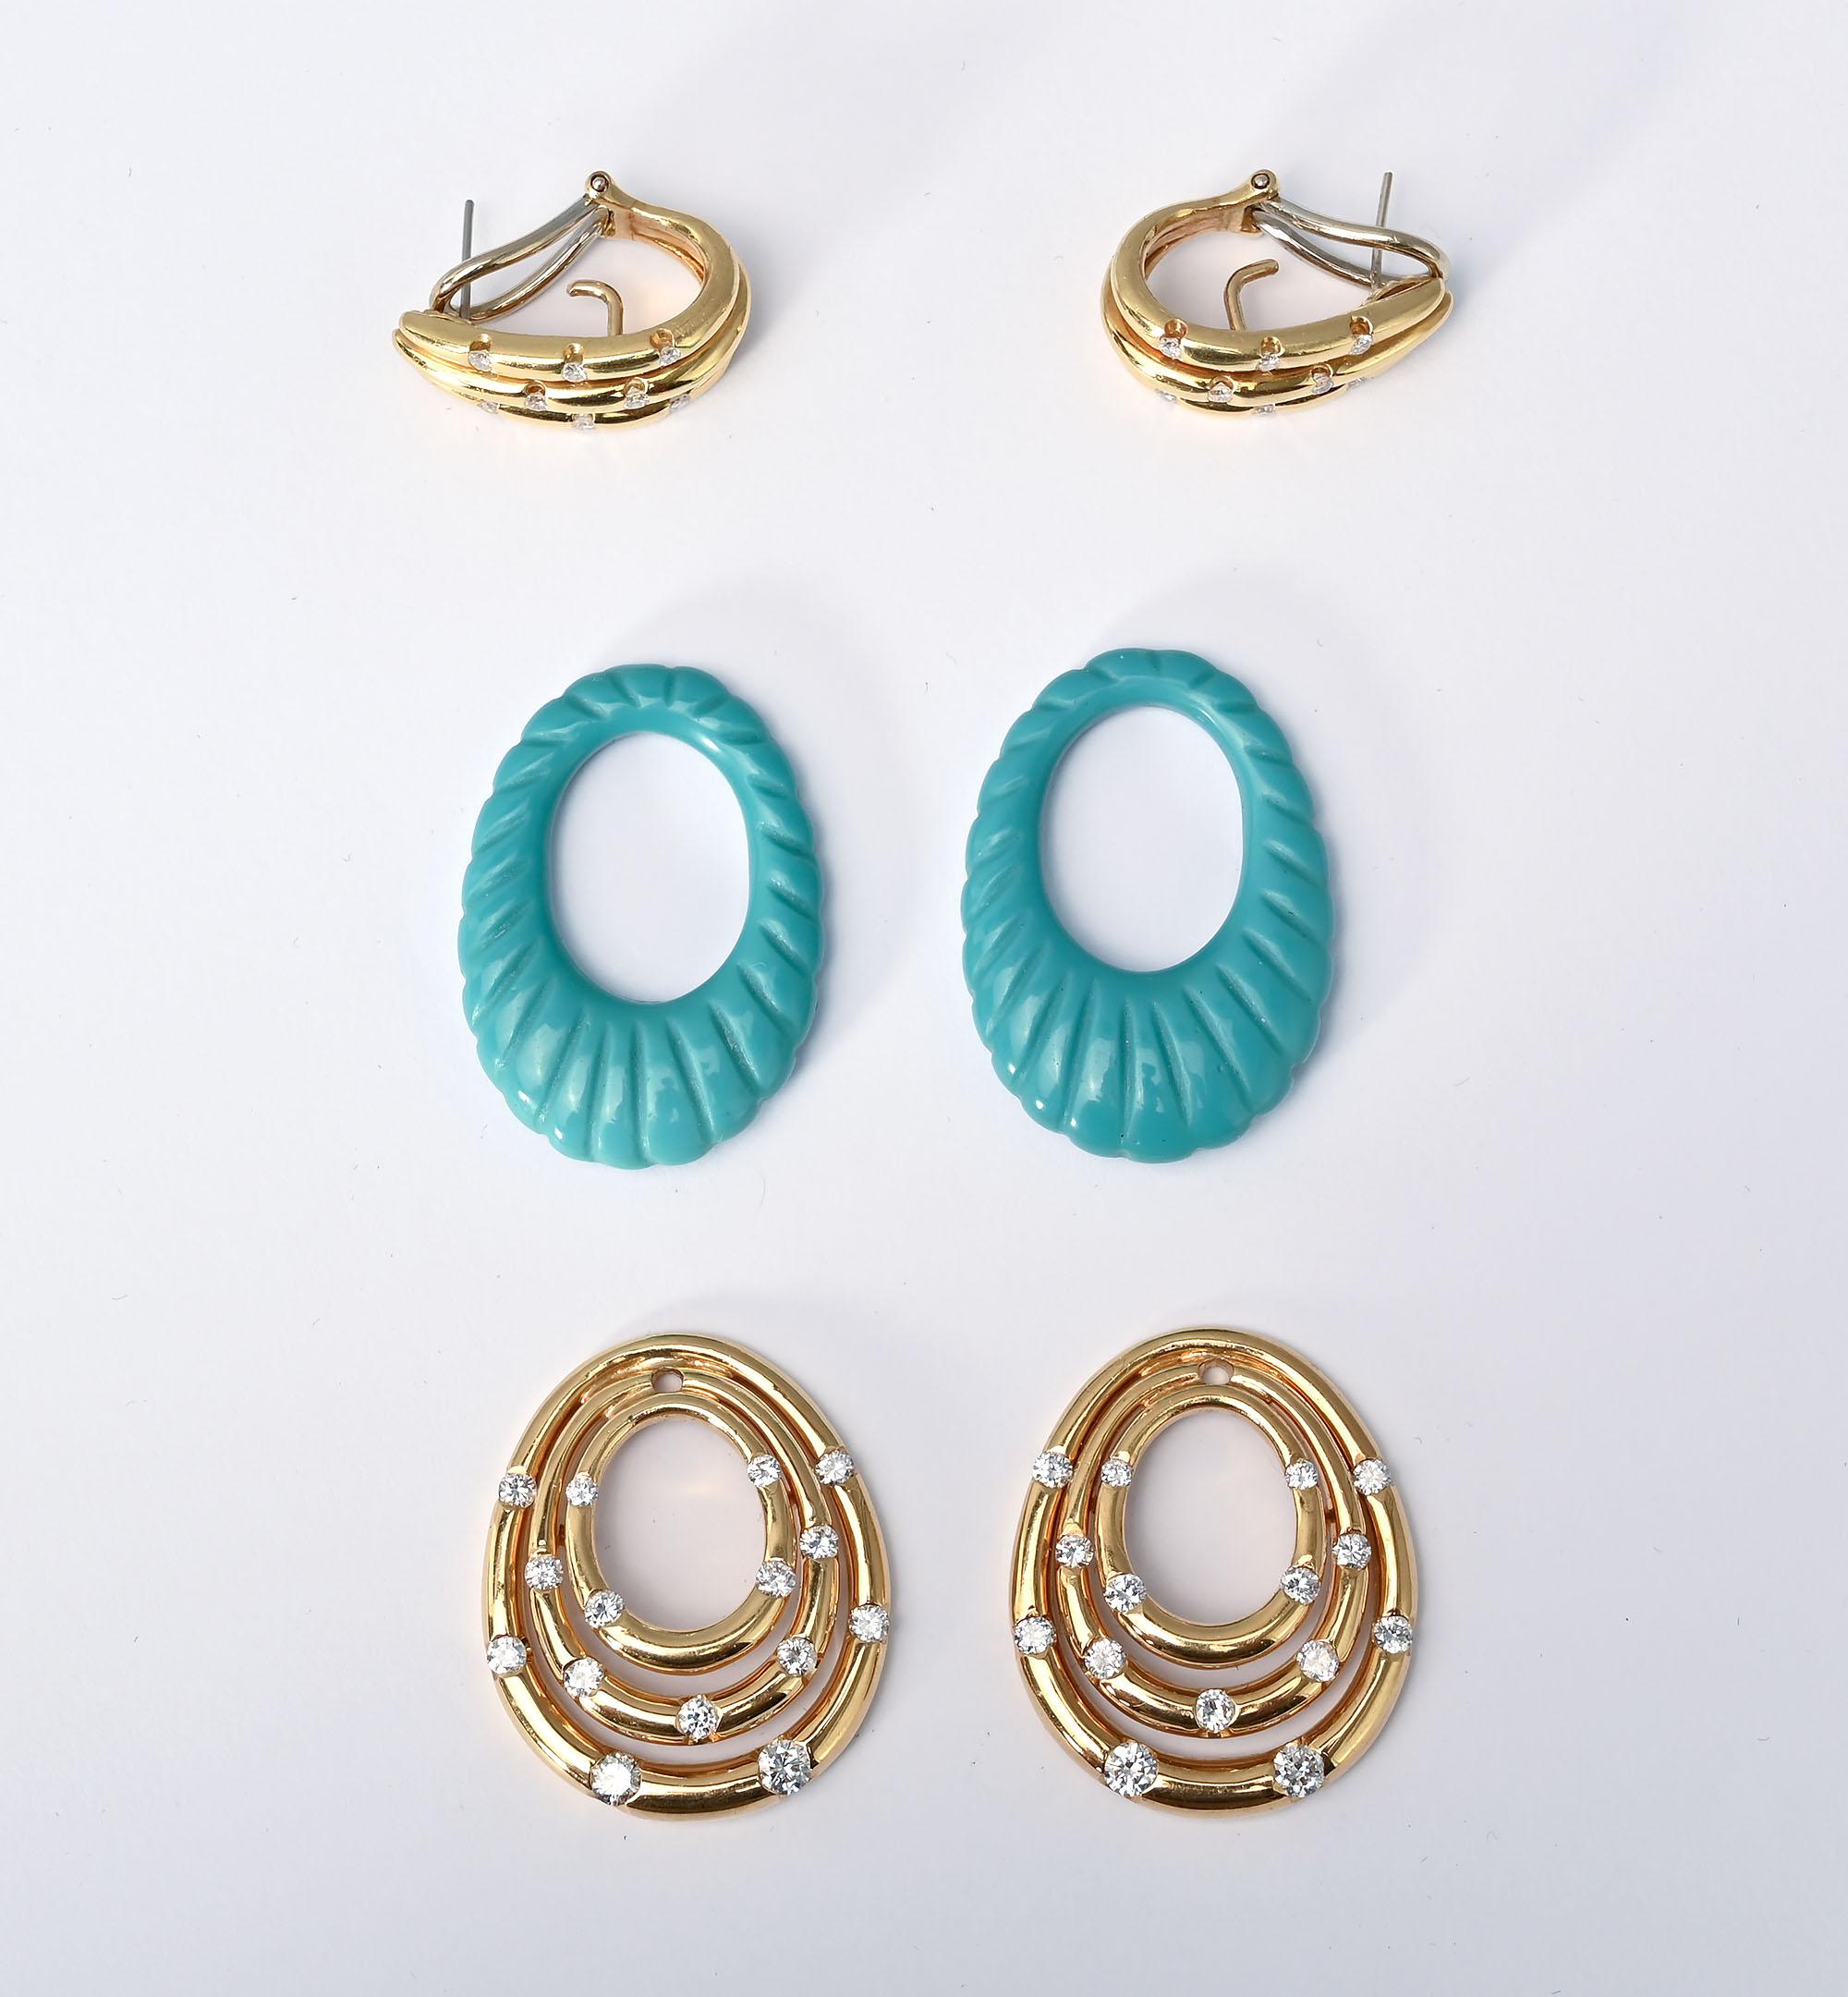 Never has there been a pair of earrings that can be worn in more combinations. 
Most straightforward is wearing the two triple rows of gold with diamonds together as a dangle. The top portion can be worn by itself as a triple hoop with diamonds.  In